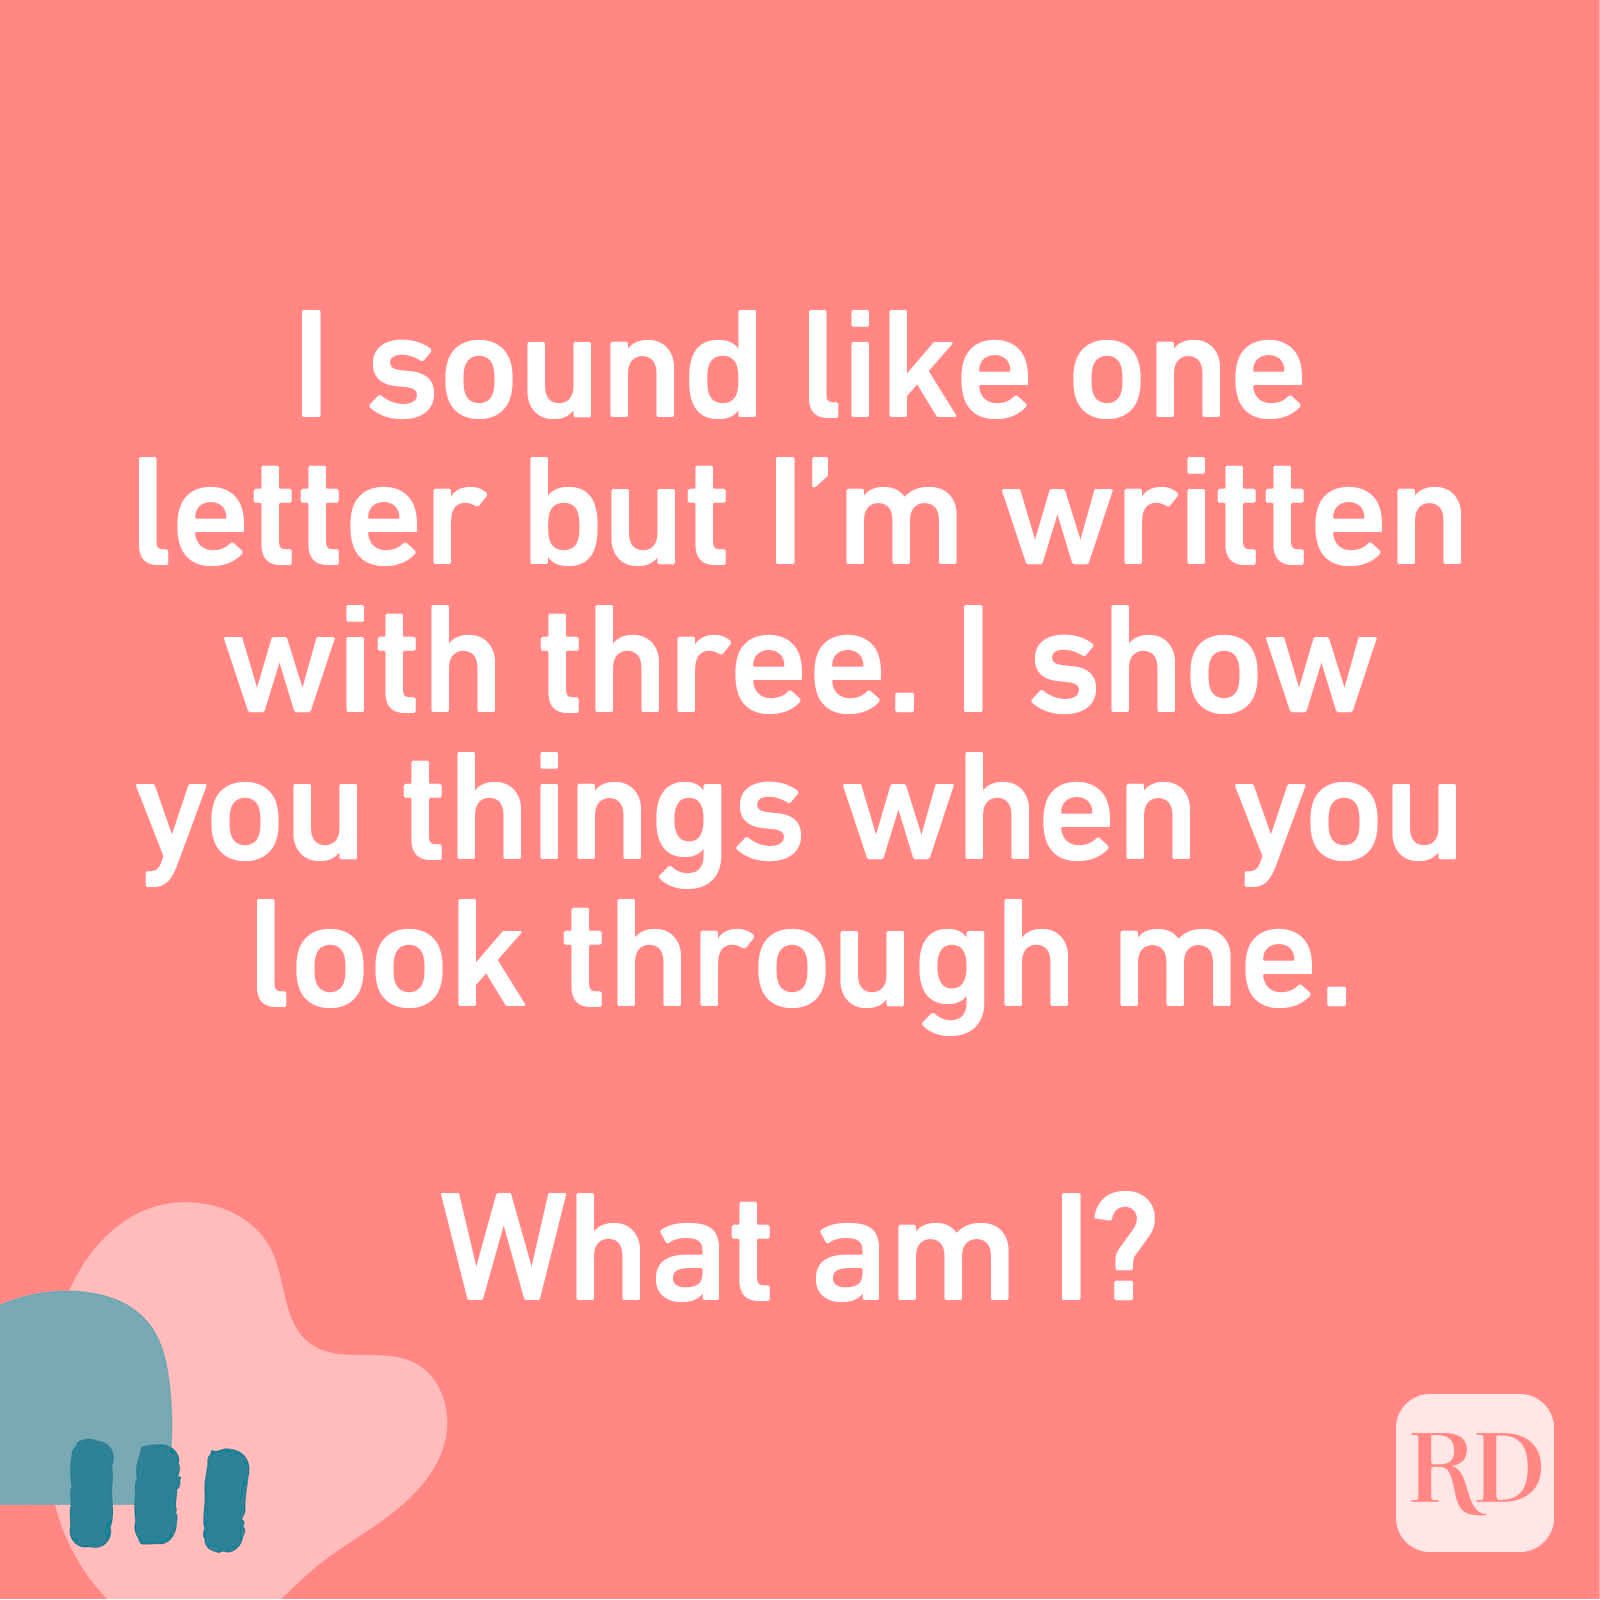 I sound like one letter but I’m written with three. I show you things when you look through me. What am I?